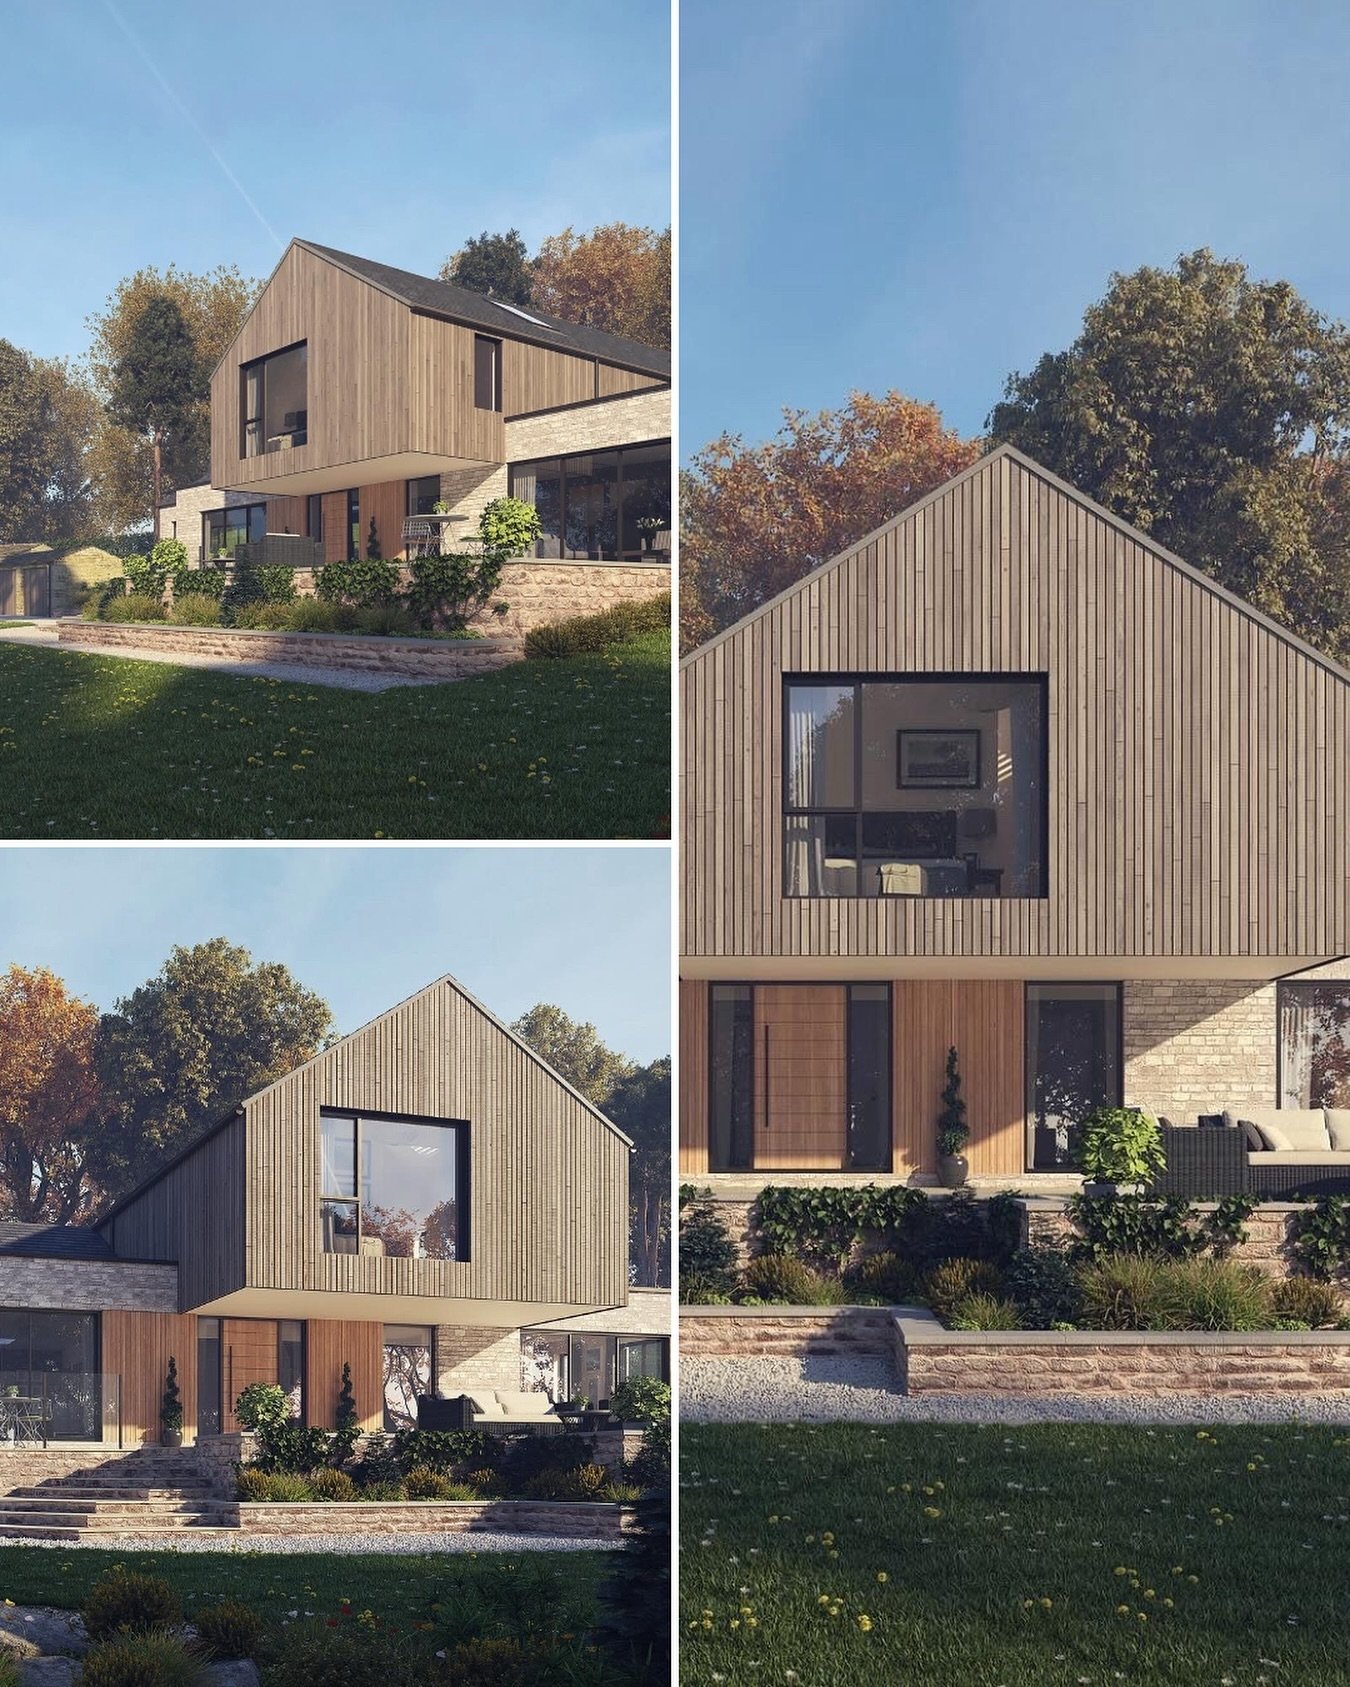 Brightman Clarke Architects specialising in luxury new builds homes and bespoke modern extensions.

WE DON&rsquo;T DESIGN HOUSES. TOGETHER, WE CREATE HOMES

#BrightmanClarkeArchitects #architect #architecture #architecturedesign #architecturelover #A